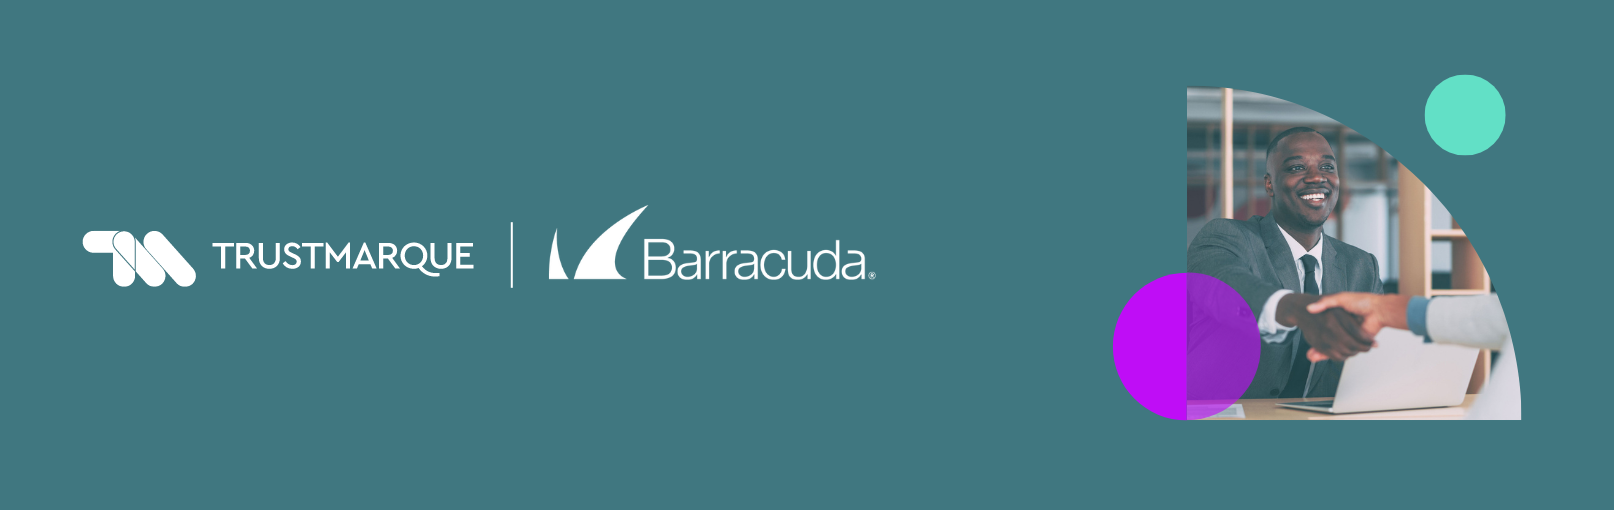 Trustmarque partners with Barracuda to deliver Prism.